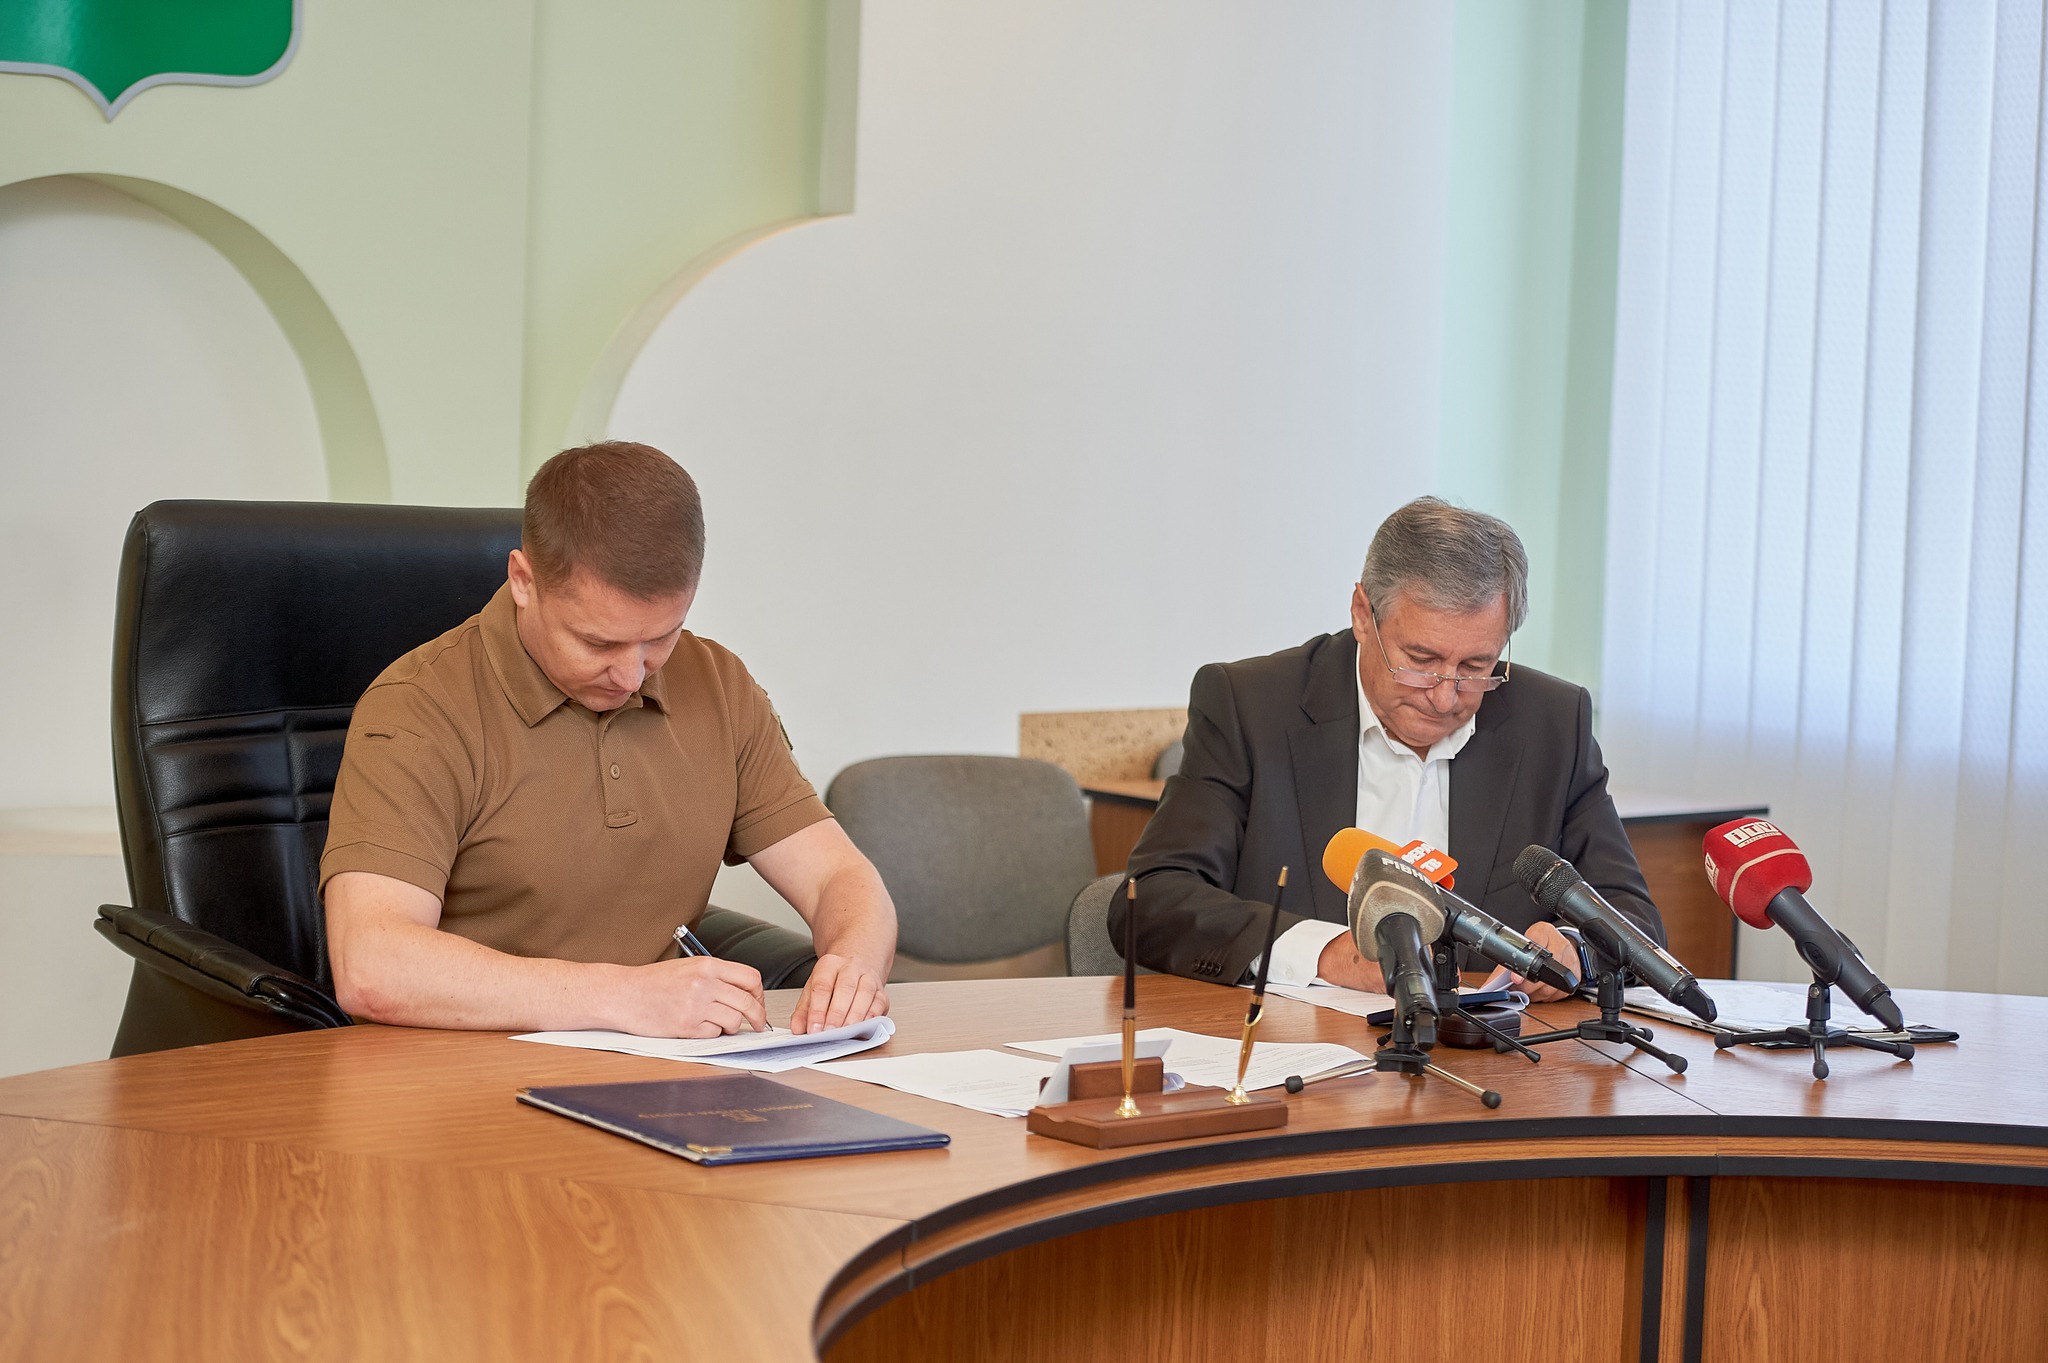 Rivne city has become a participant of ‘Promotion of social infrastructure development’ Project